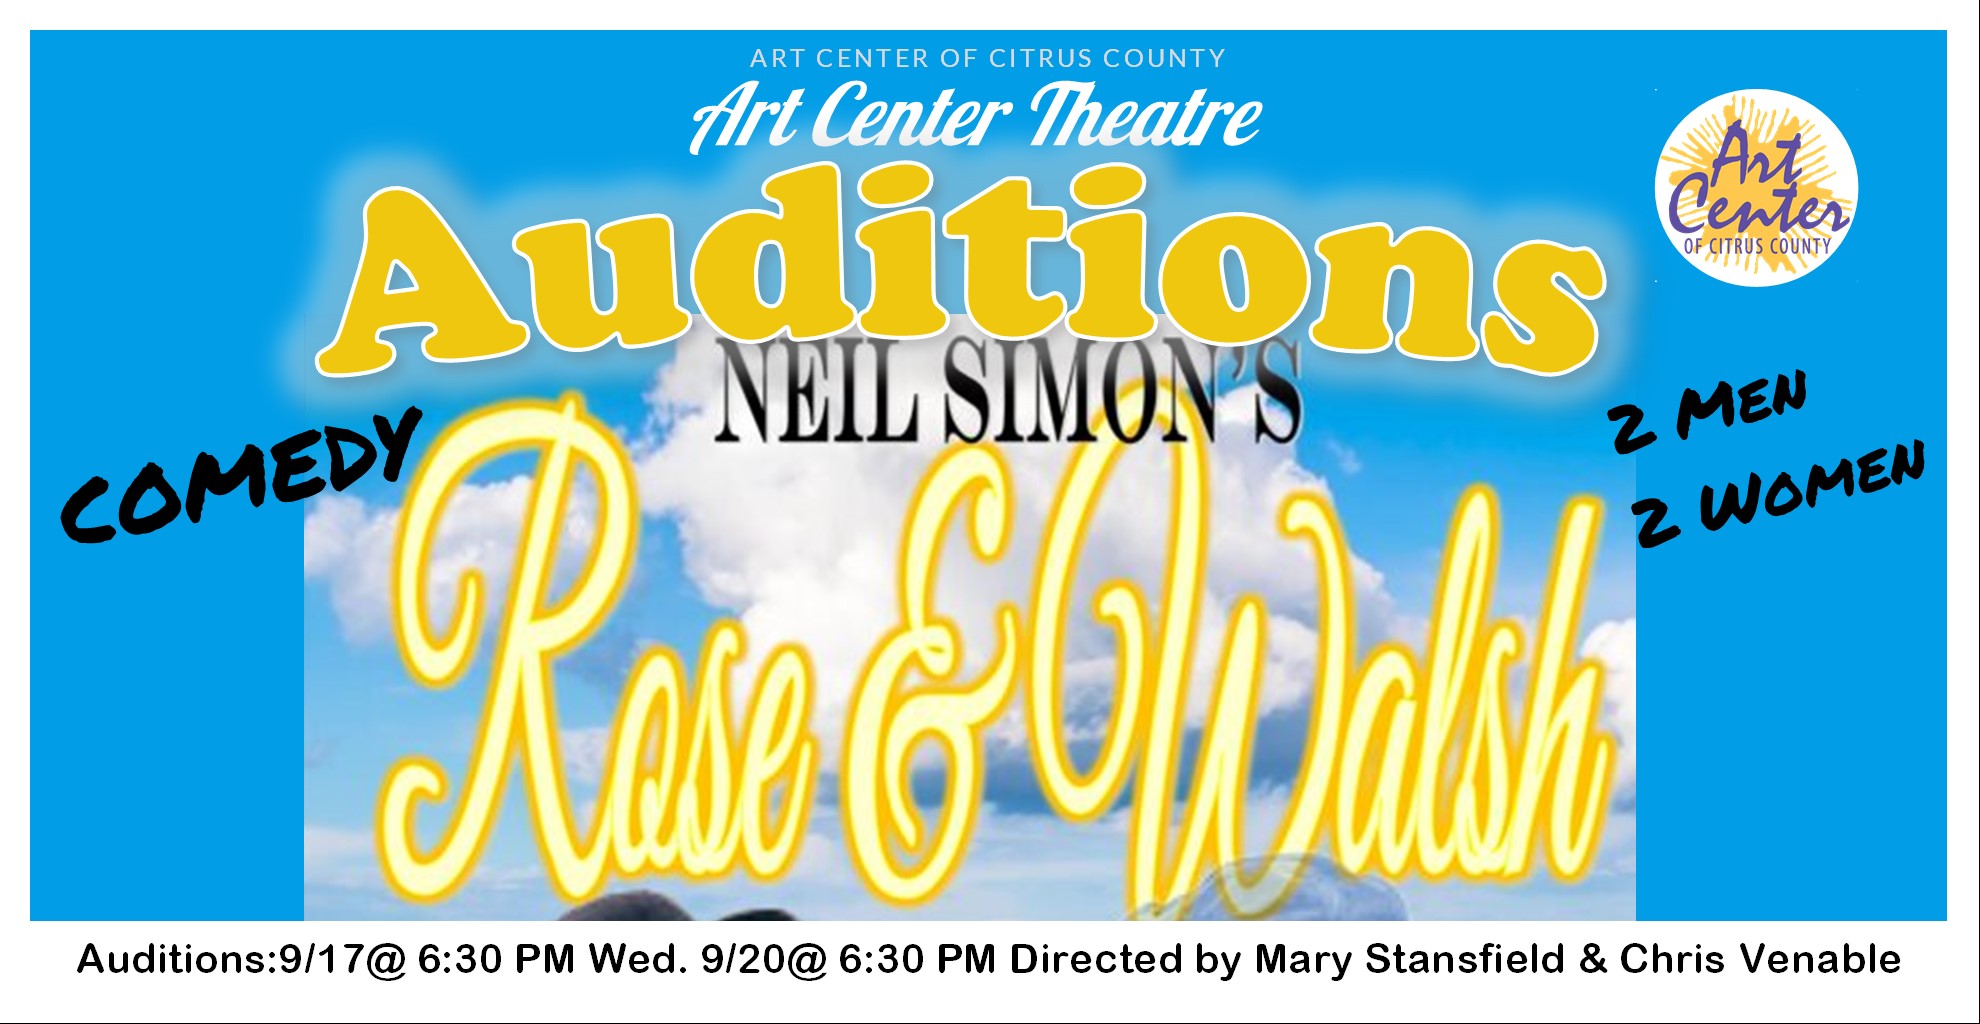 Auditions for Neil Simon’s: Rose and Walsh